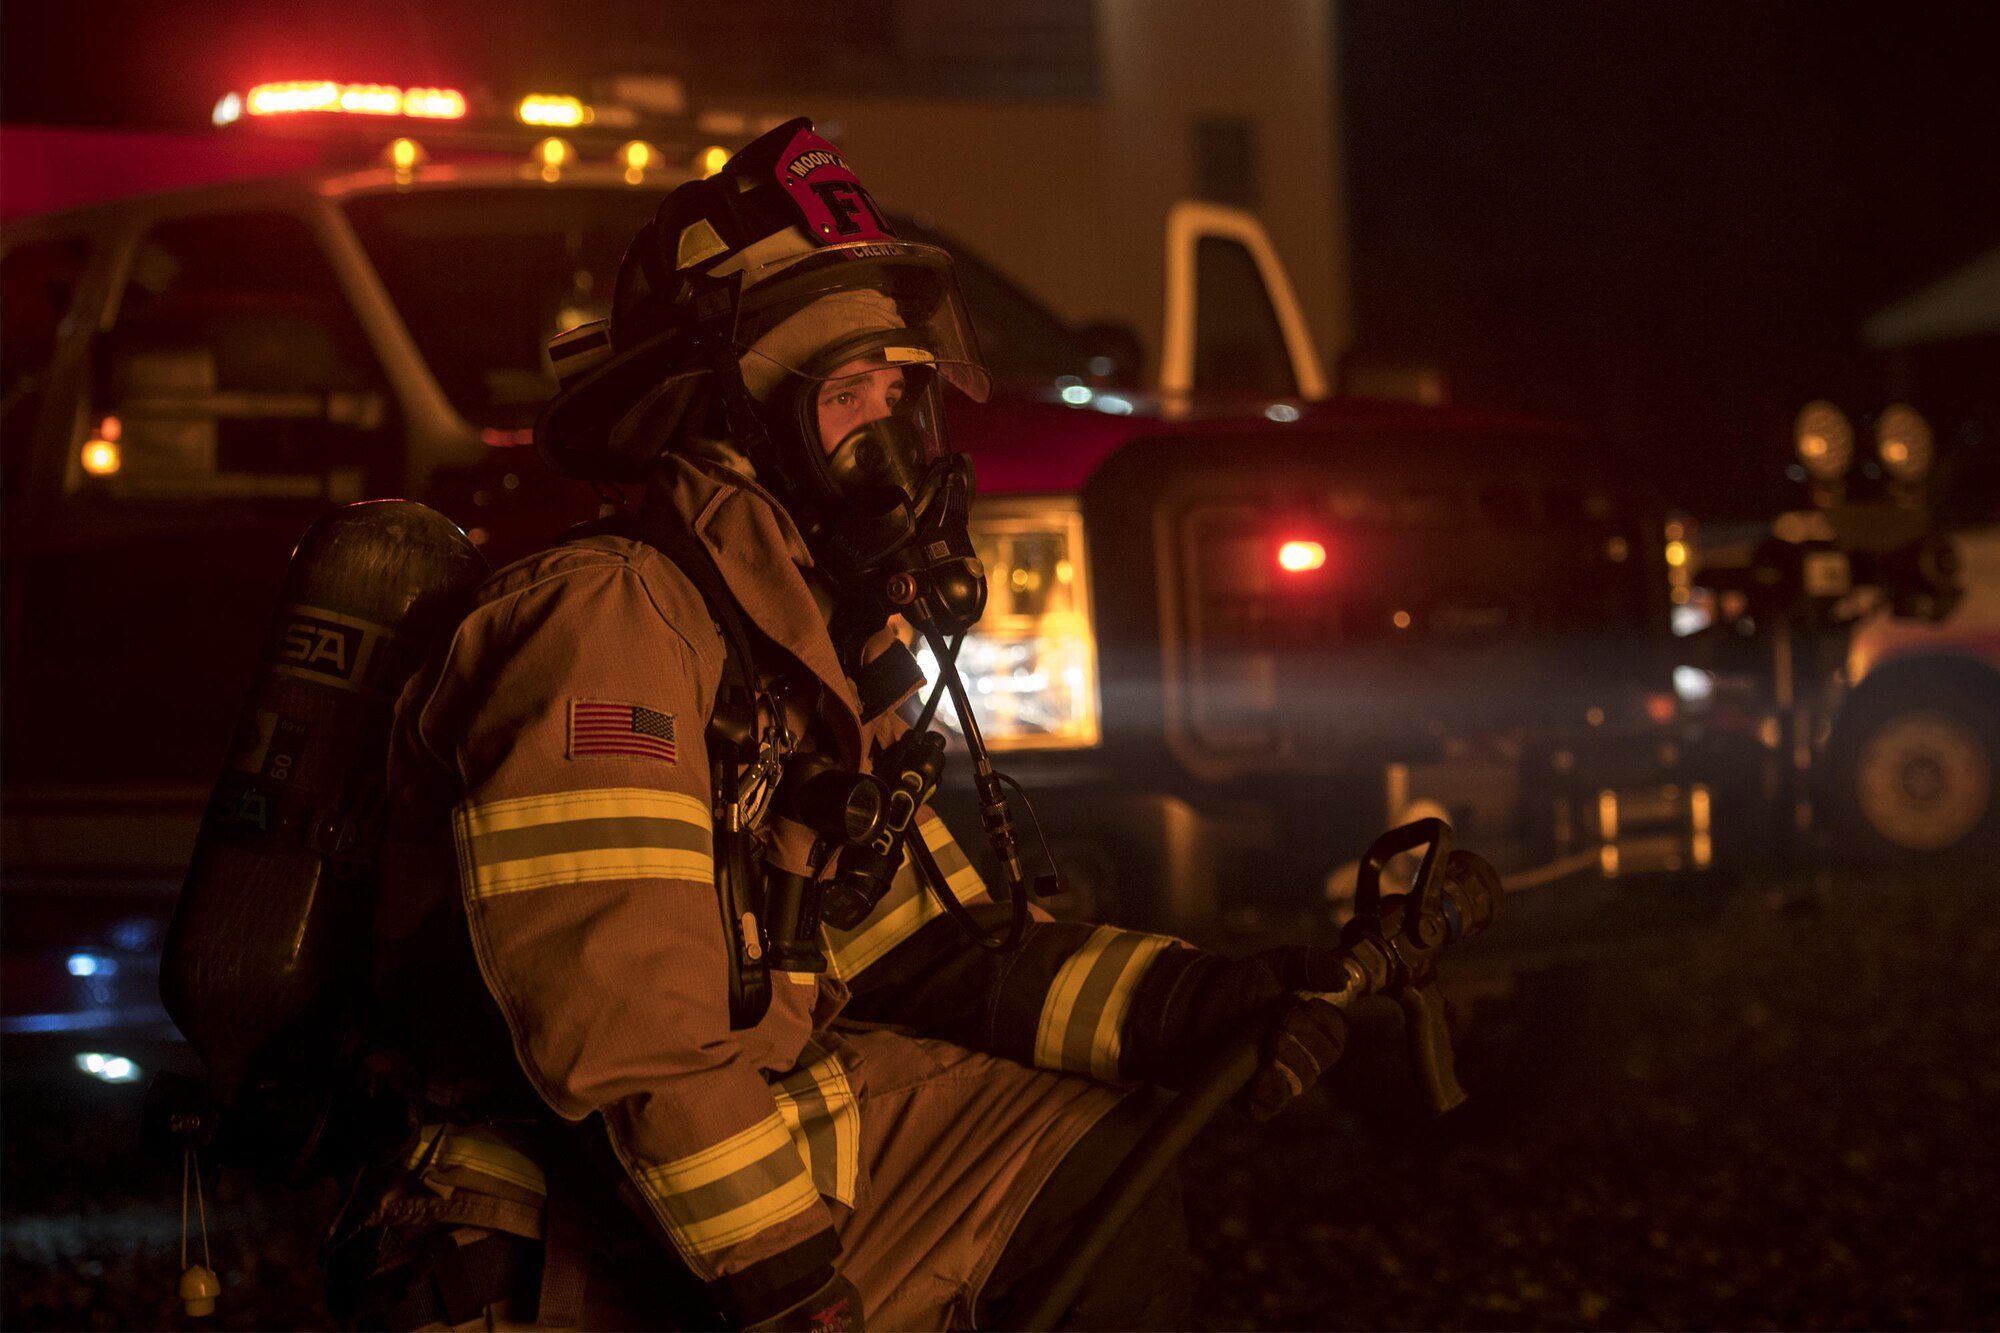 Staff Sgt. Joshua Humes, 23d Civil Engineer Squadron fire protection crew chief, kneels during nighttime, live-fire training, Jan. 10, 2017, at Moody Air Force Base, Ga. Approximately 15 firefighters participated in this live fire training. (U.S. Air Force photo by Airman 1st Class Daniel Snider)